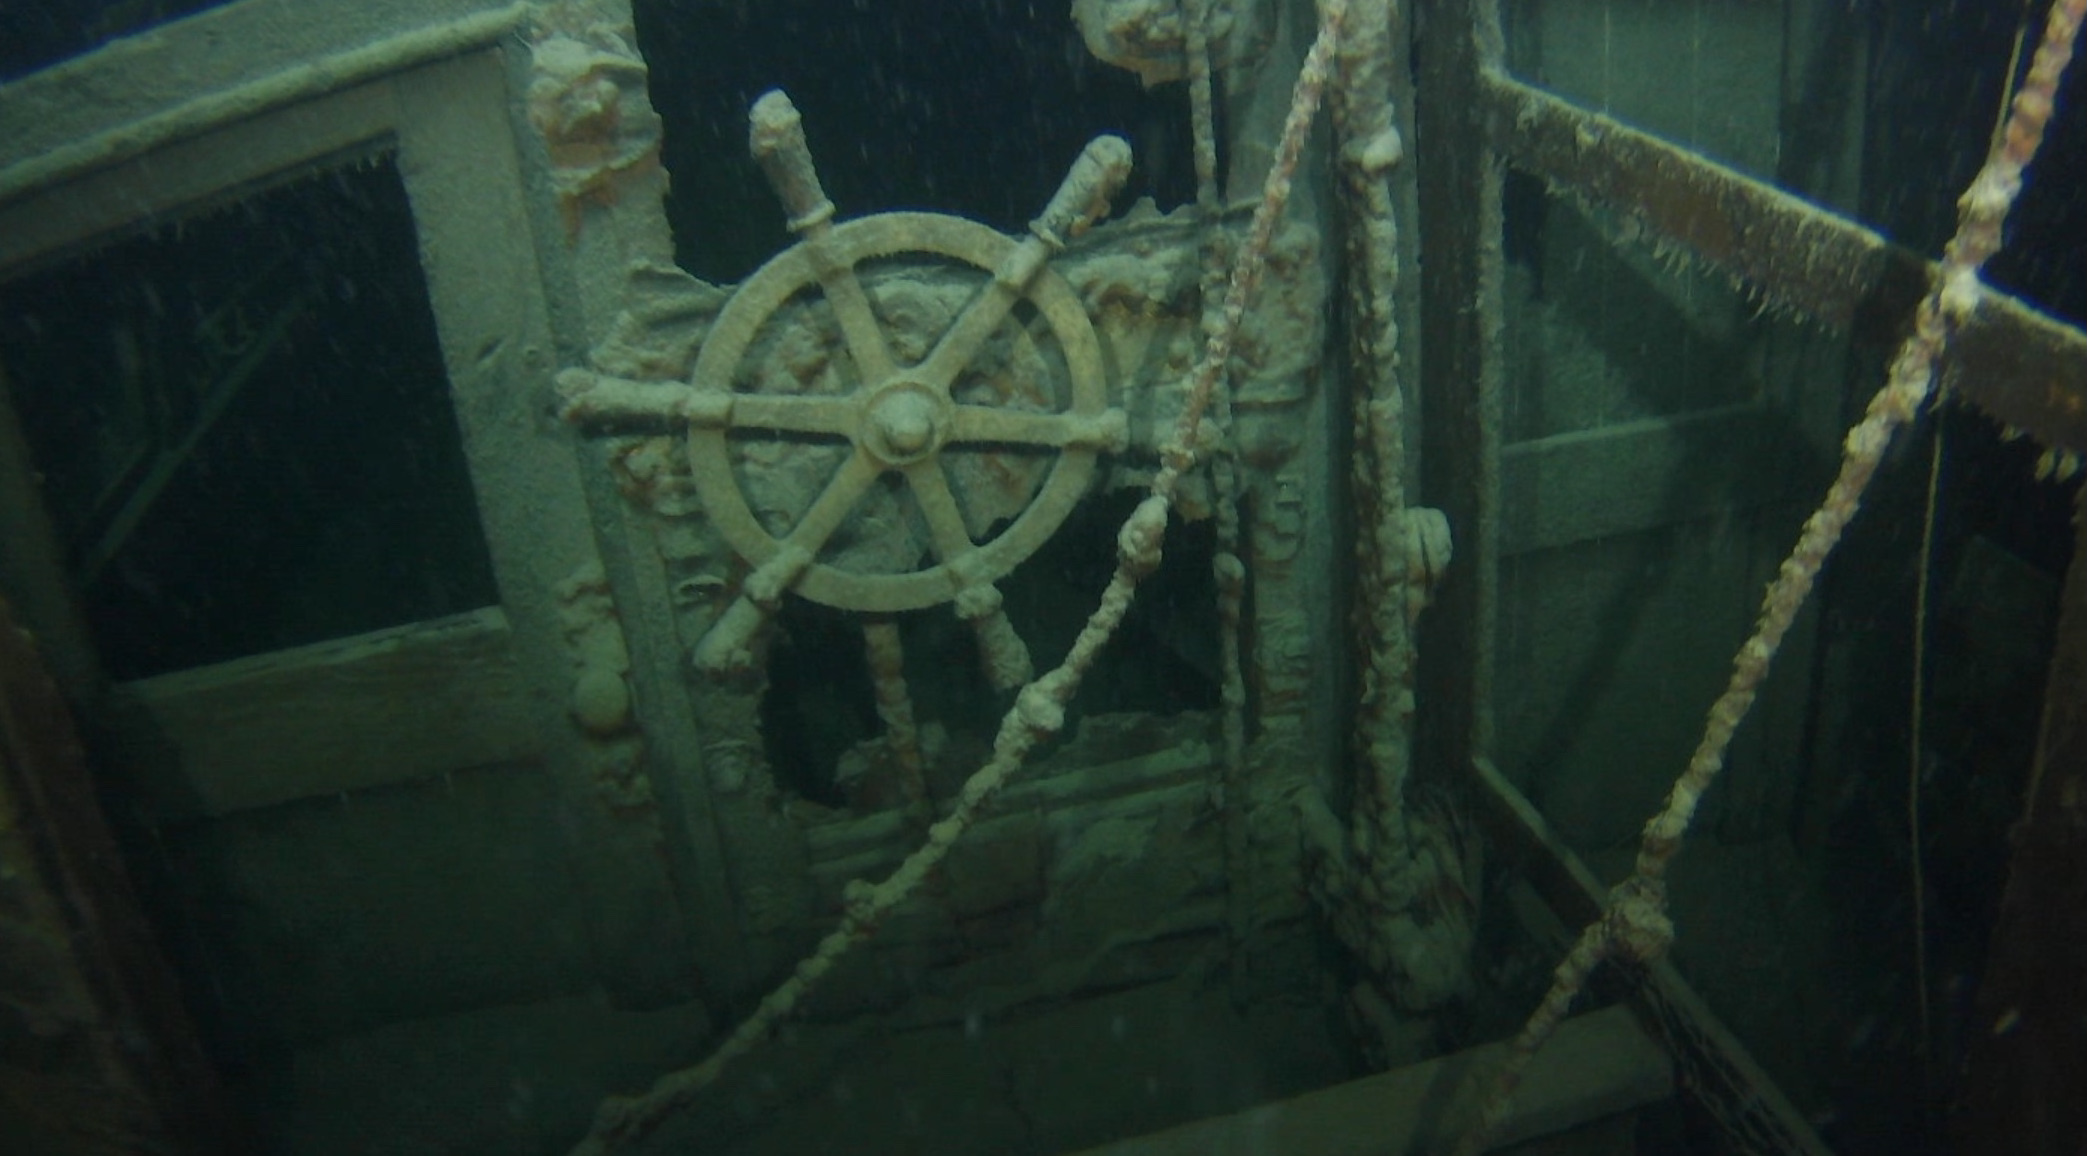 Submarine dive to the wreck at Bürgenstock